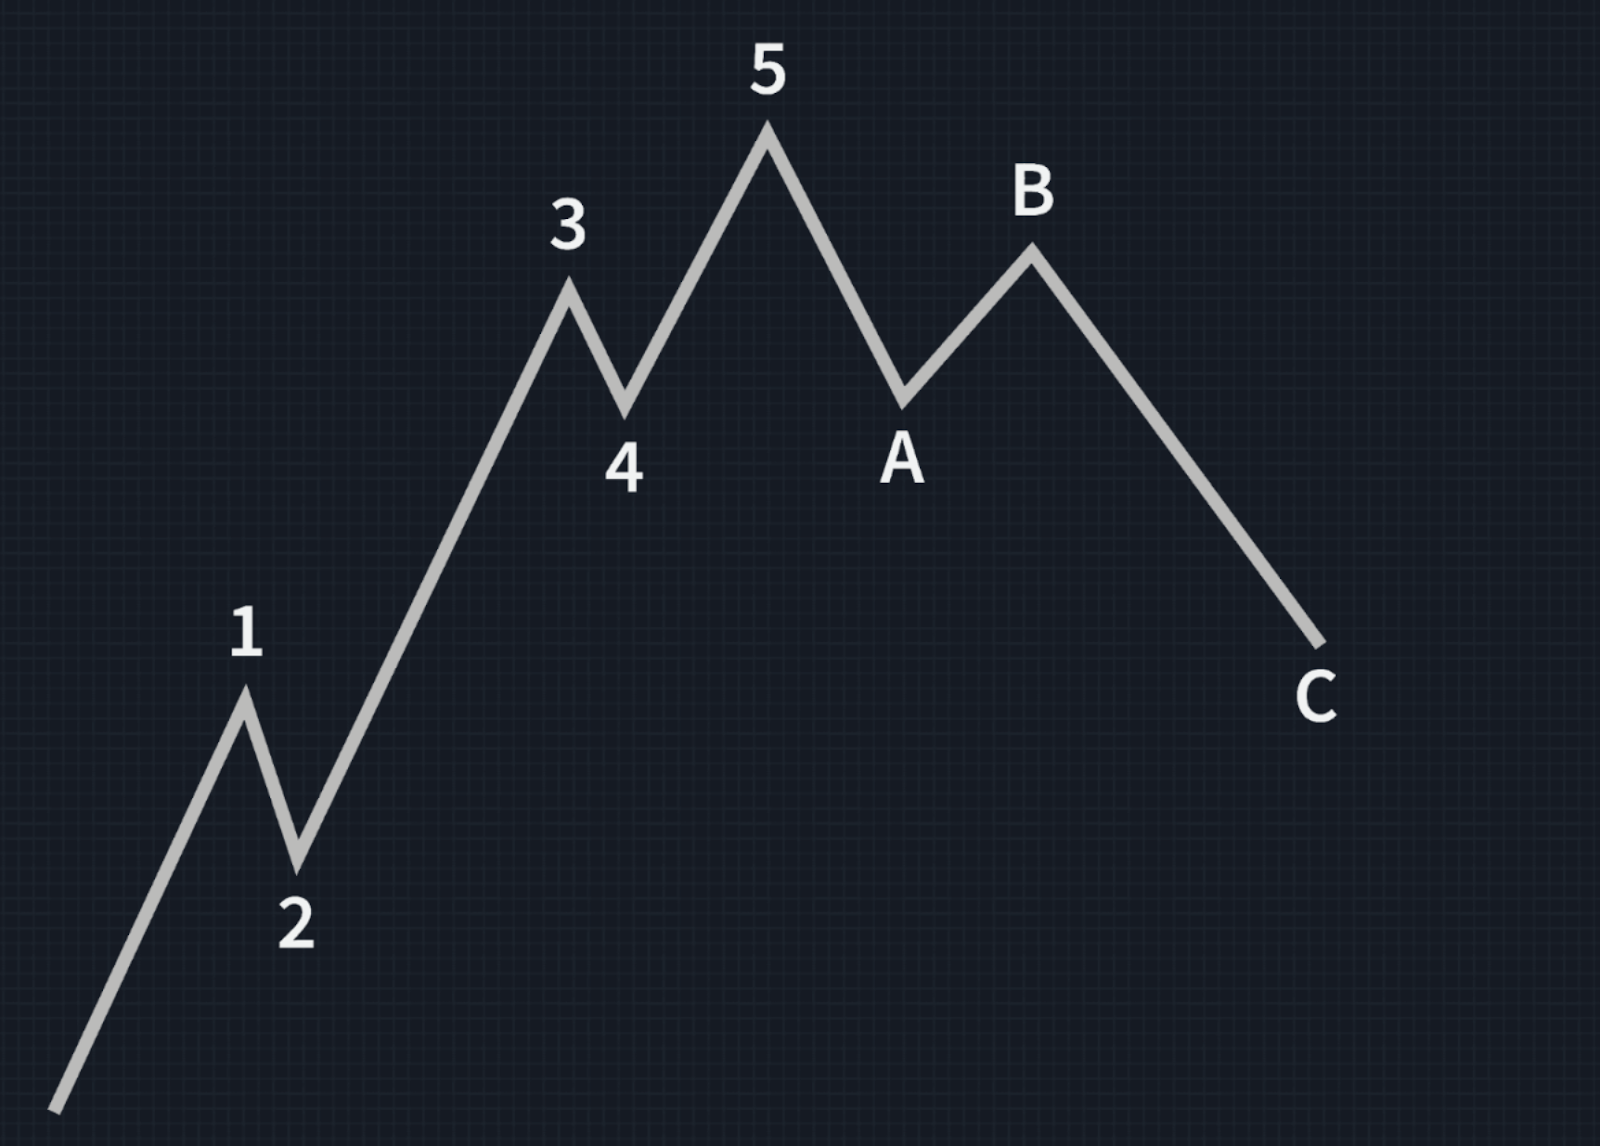 New approach to intraday & swing trading: Elliott wave theory